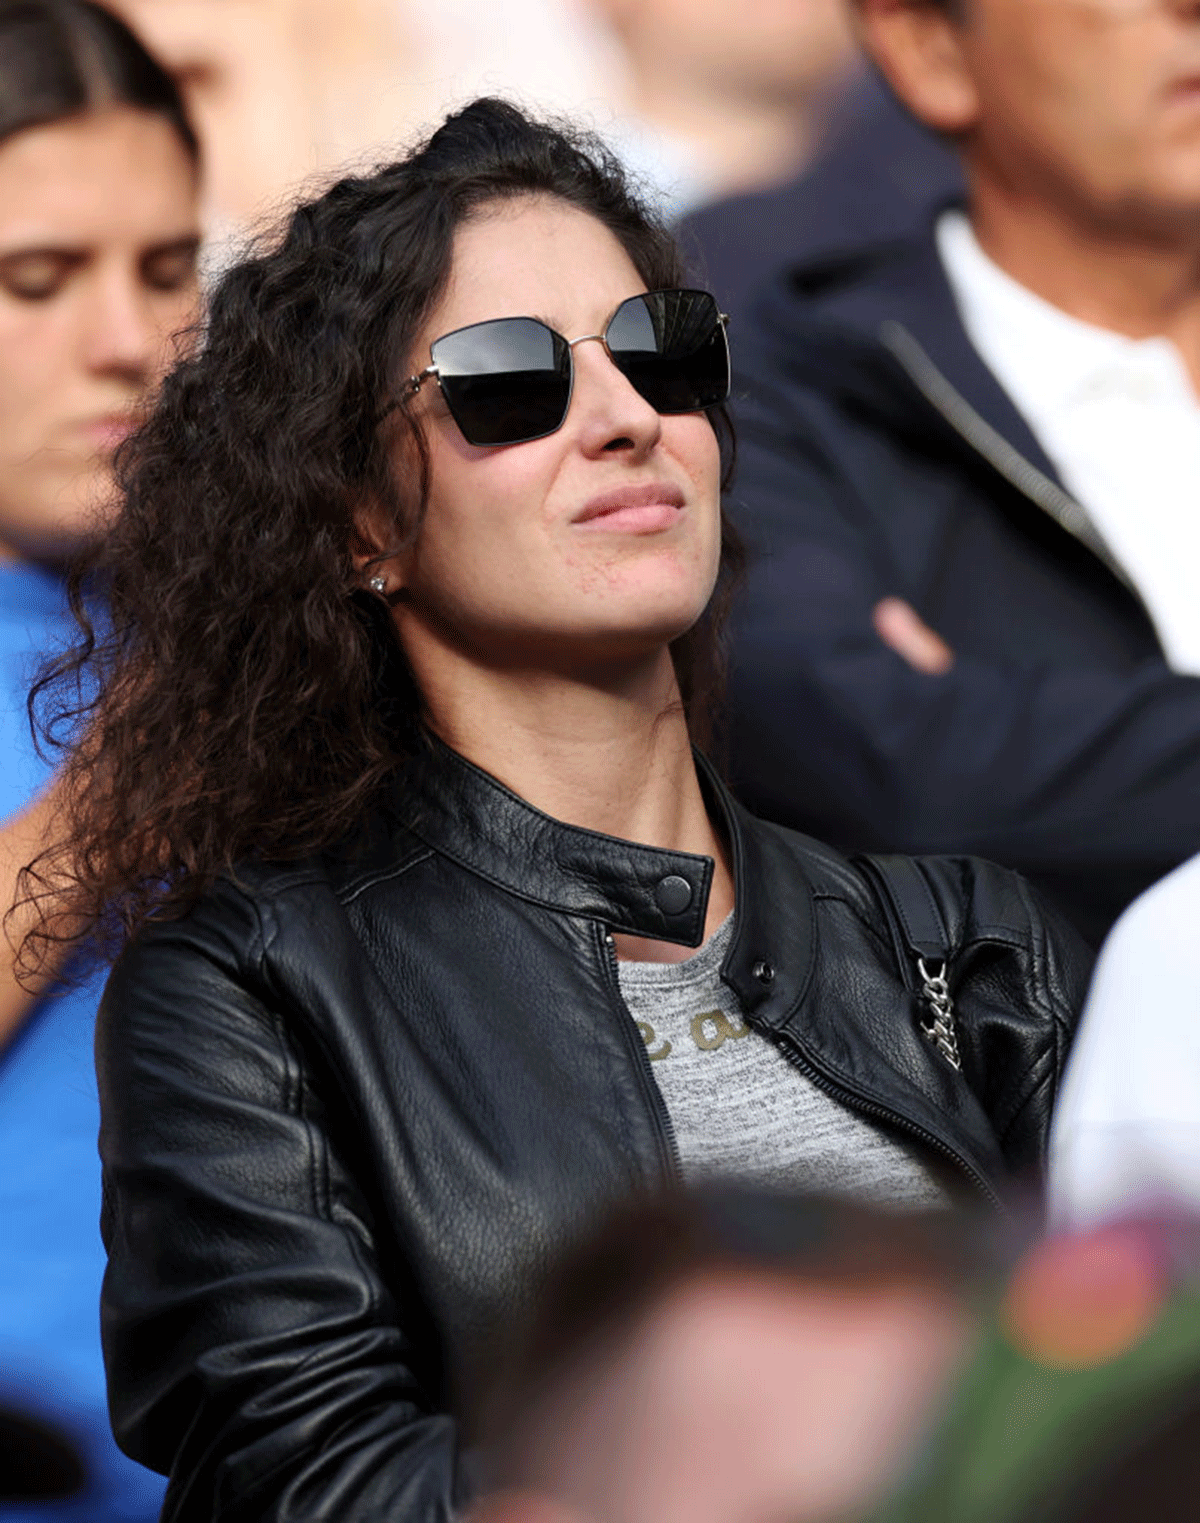 Rafael Nadal's wife Maria Francisca Parello is all smiles after her husband's win over Taylor Fritz on Wednesday